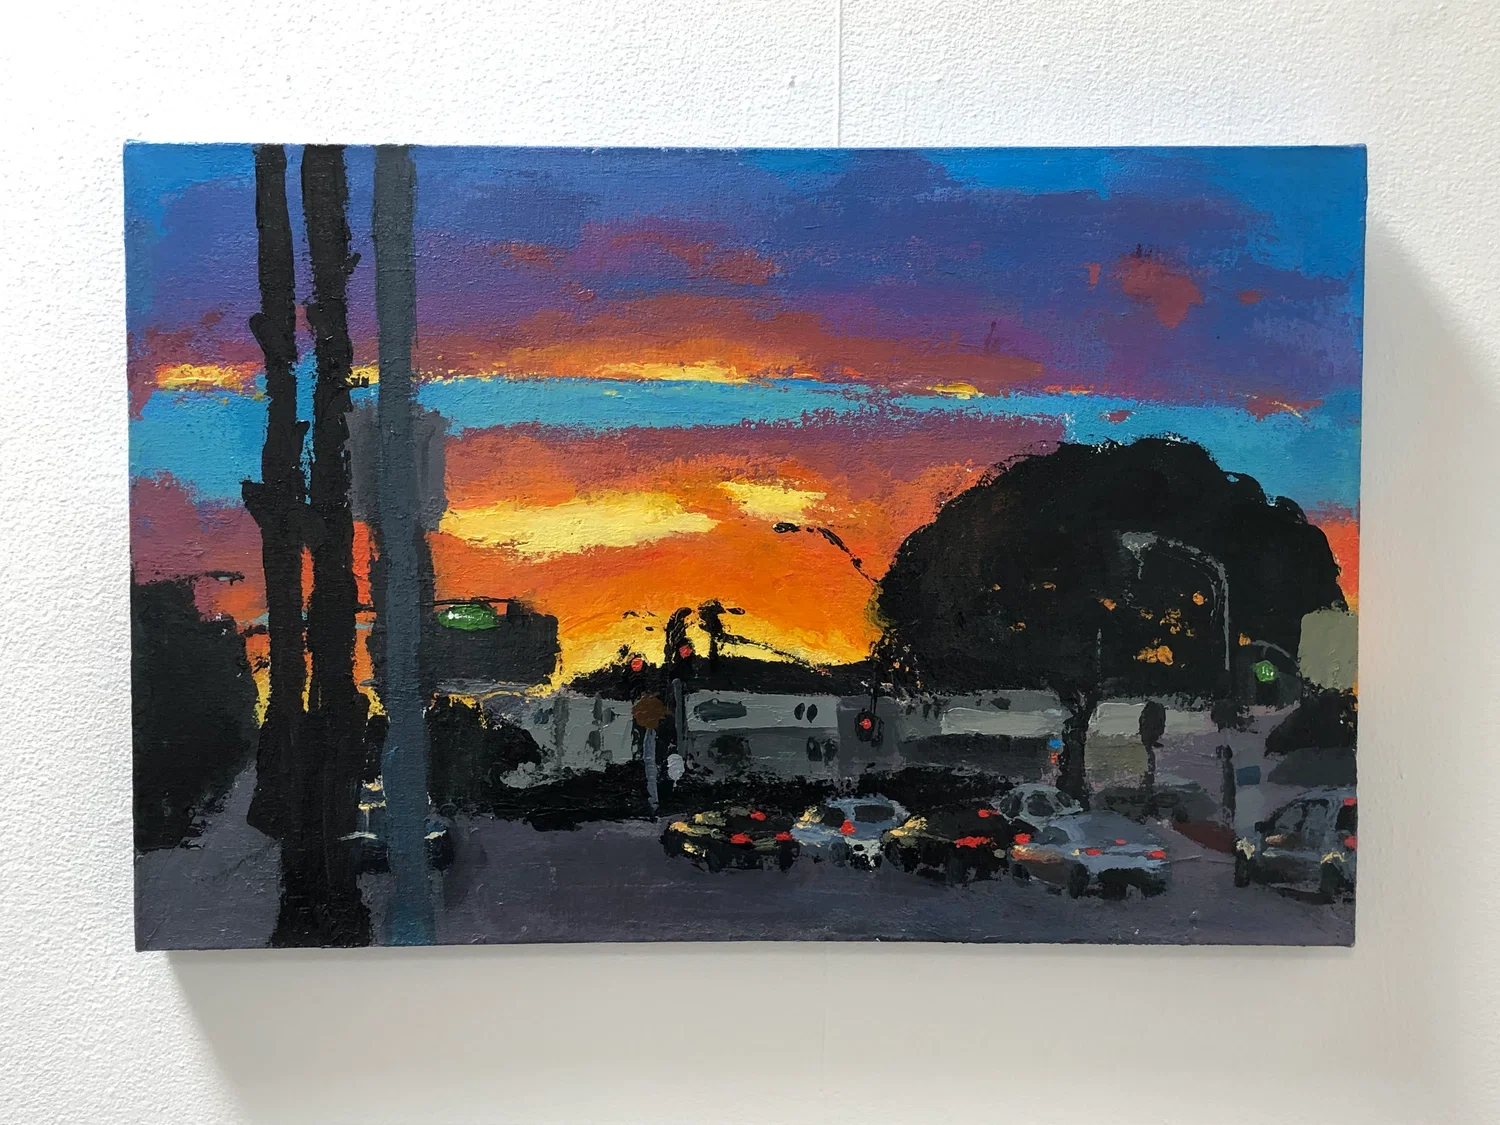 Saul Lopez Hernandez, Sunset View, Acrylic on Canvas, 20 inches x 30 inches x 1 inch, 2023